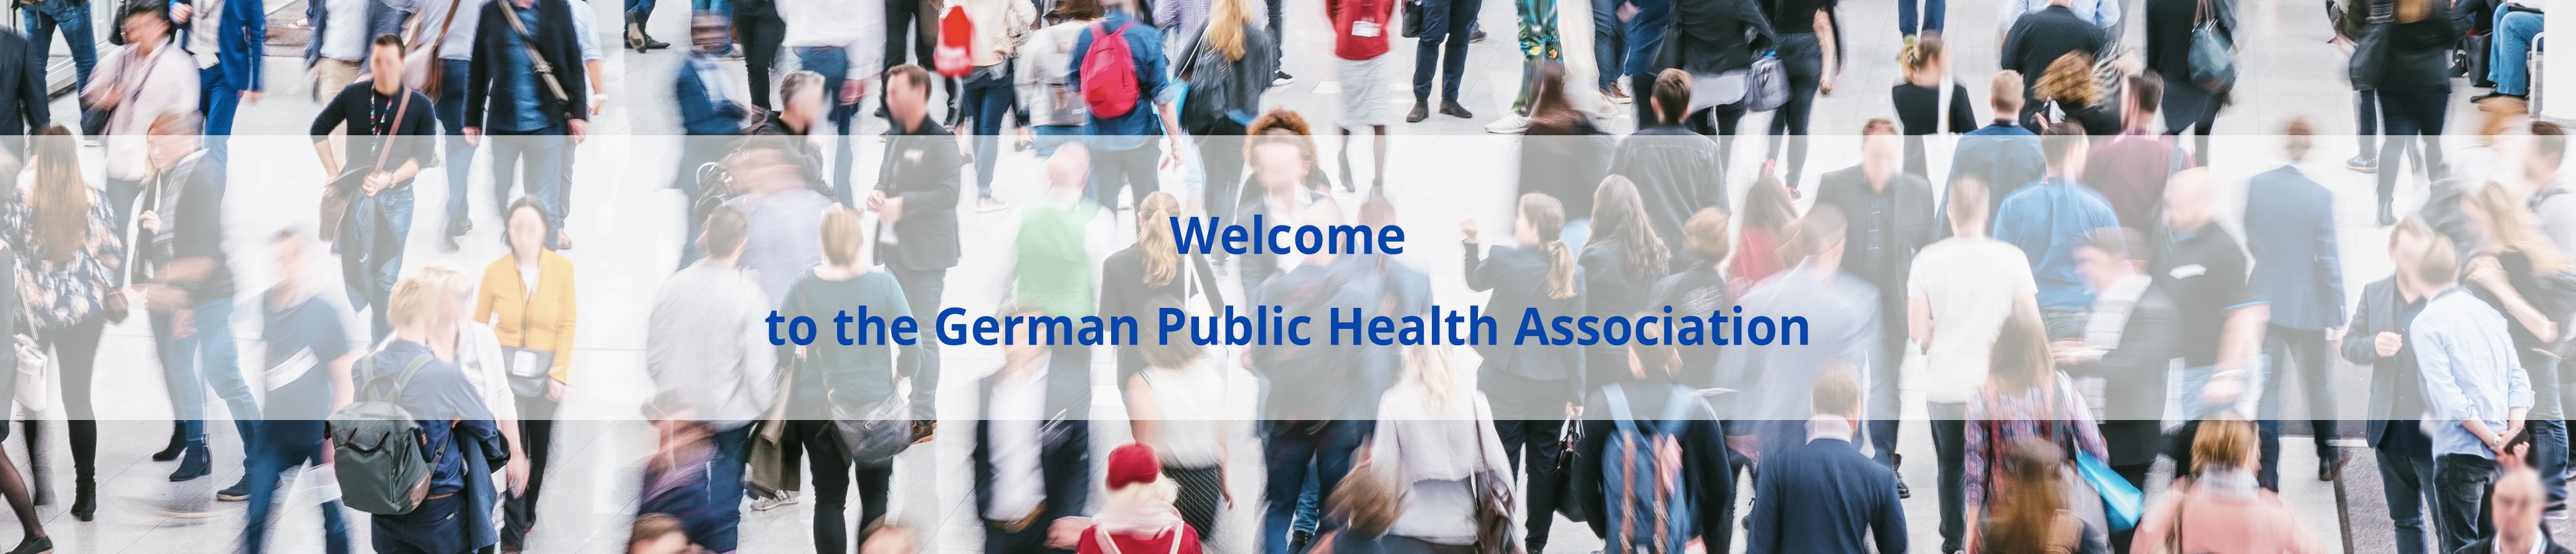 Welcome to the German Public Health Association